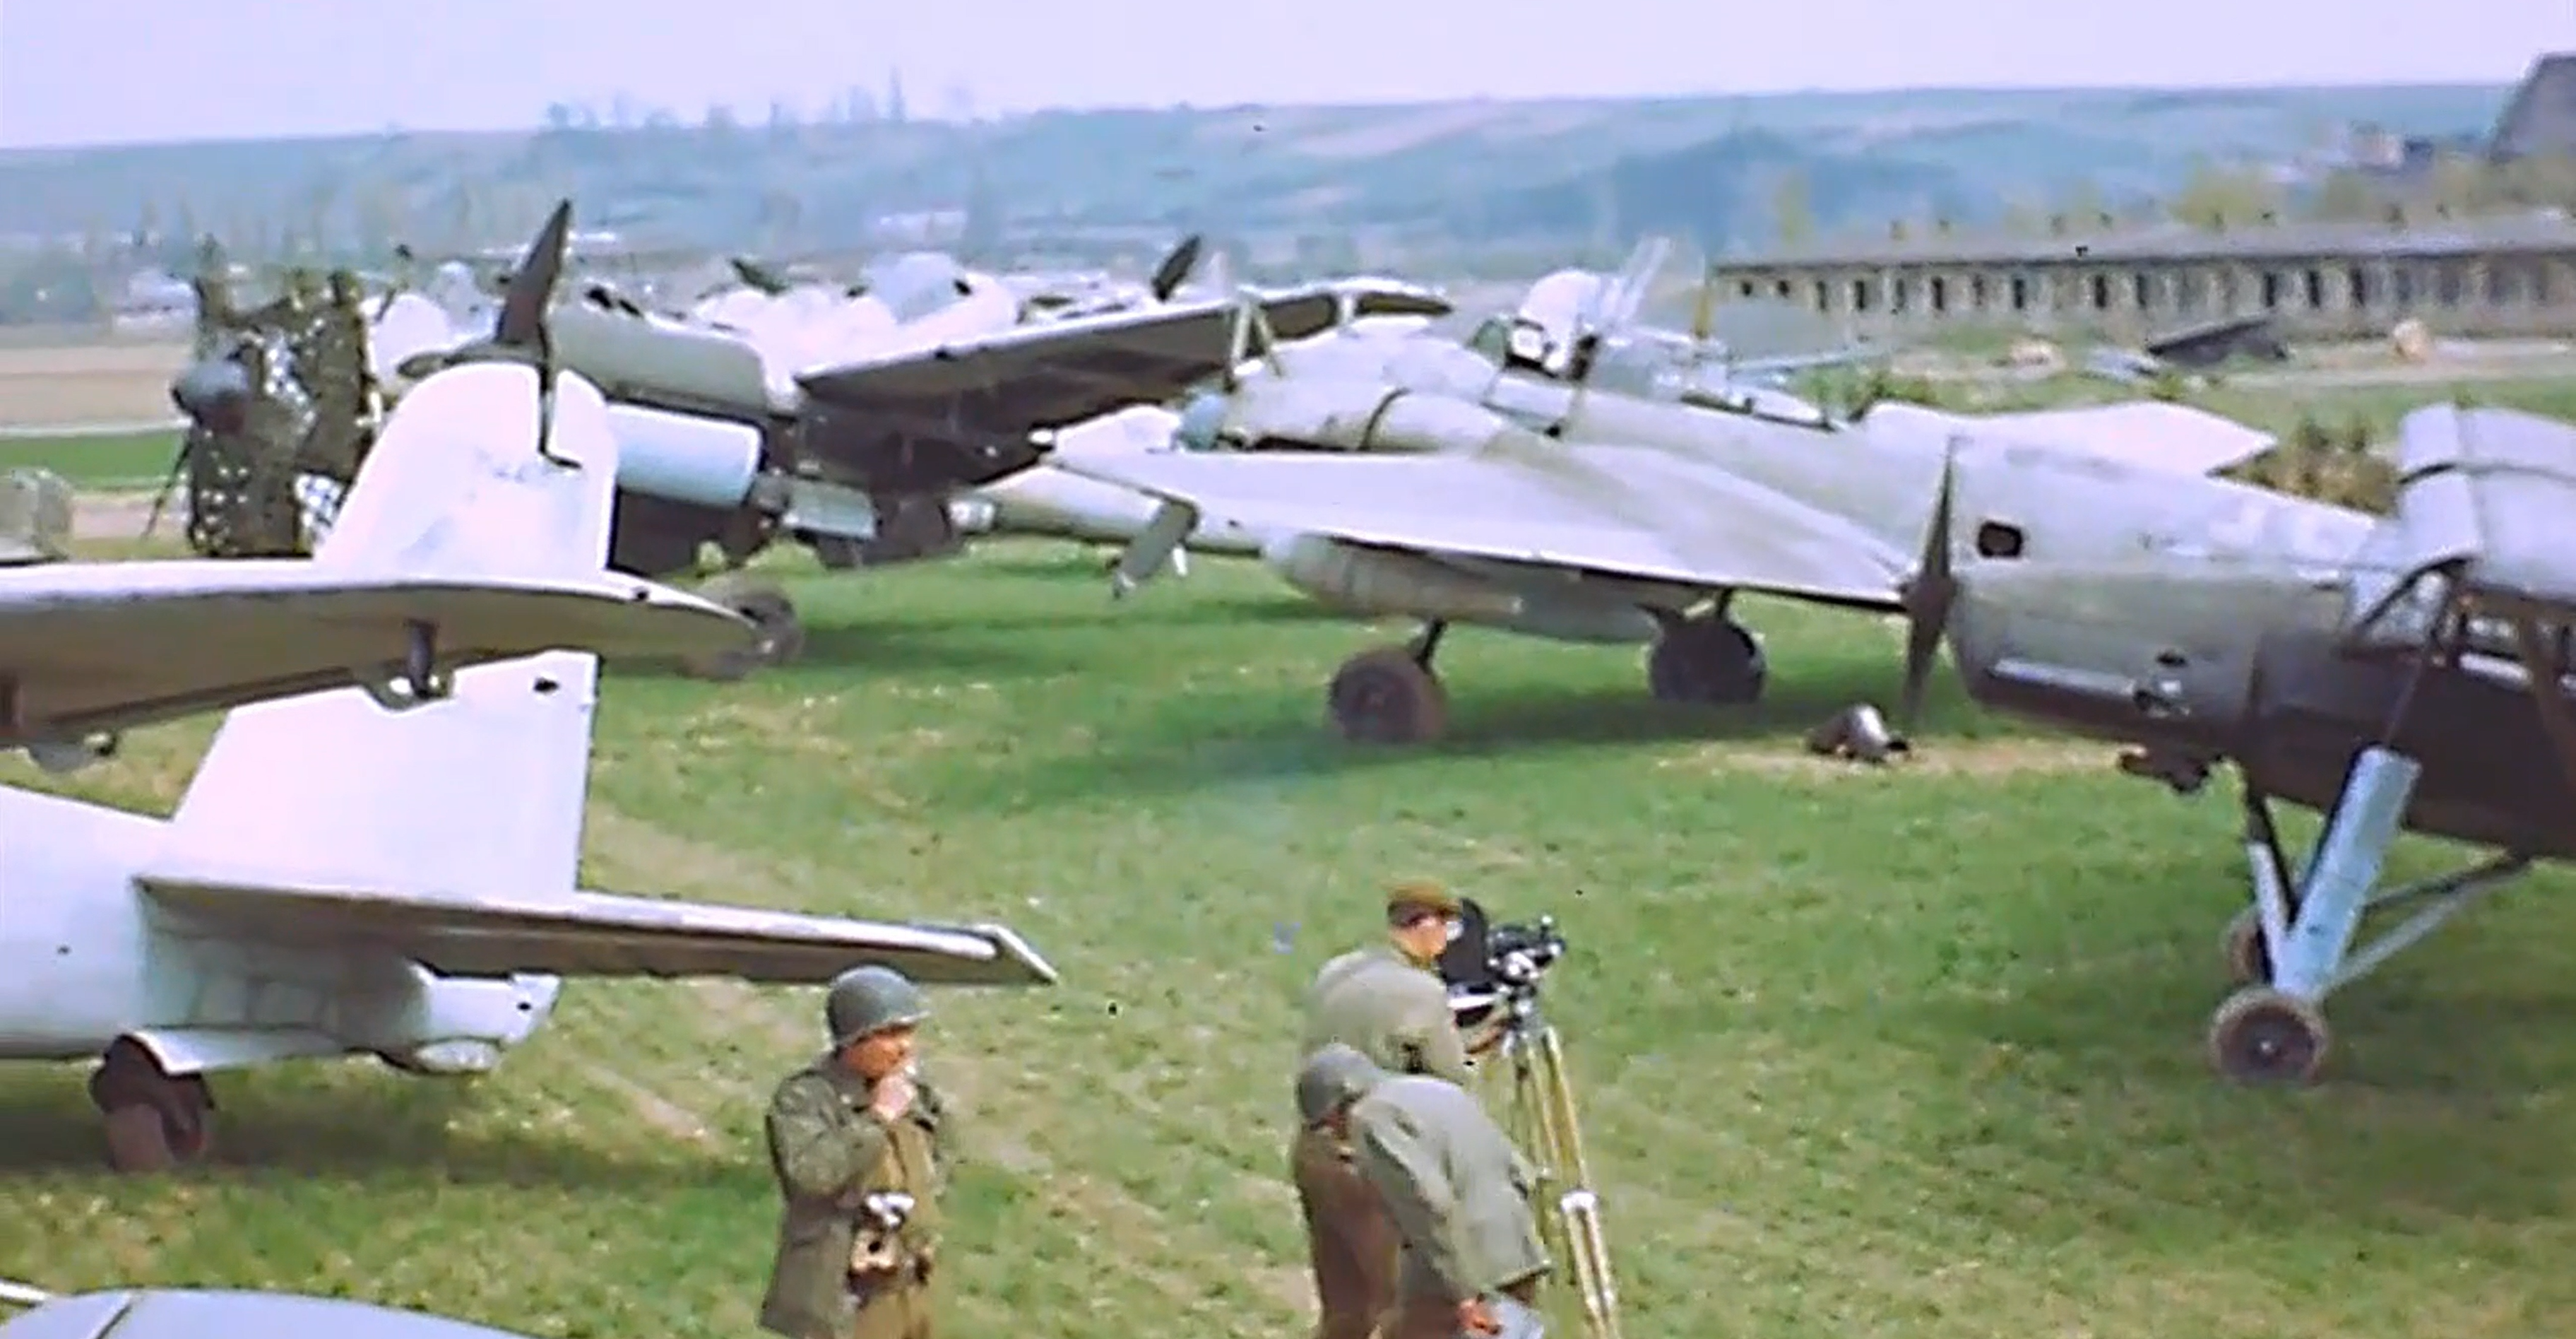 A frame from a colour video shot by United States Army personnel at Fritzlar, in spring 1945. In the upper left corner a late war Ju 88 is visible, with its dark green prefabricated engine cowling. If Ta 152 H W.Nr. 150168 engine cowling had been actually painted with the same paint, the hue here shown would have been the one appeared on "Green 9".